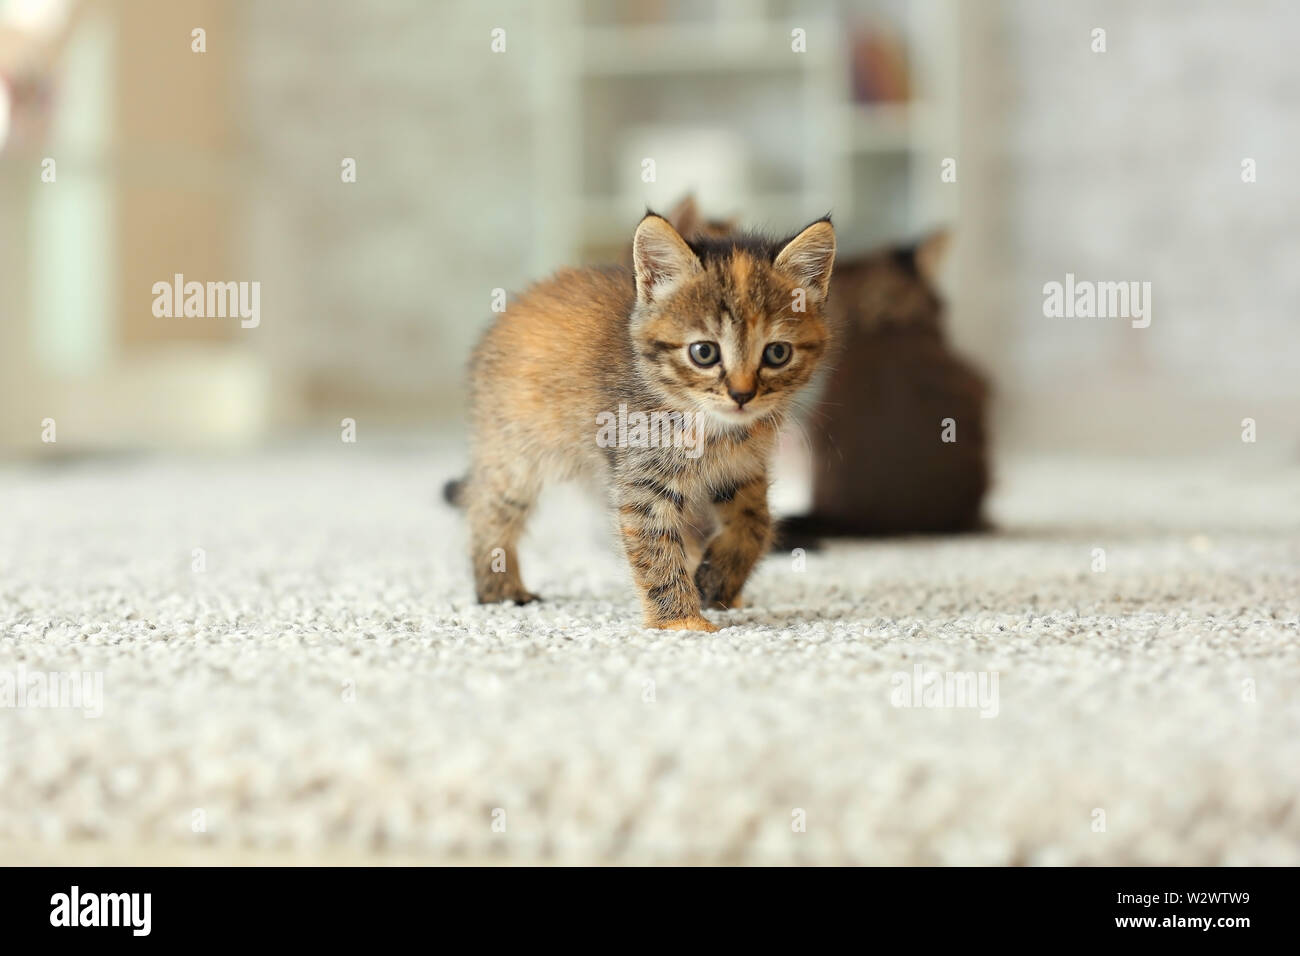 Cute funny kittens at home Stock Photo - Alamy